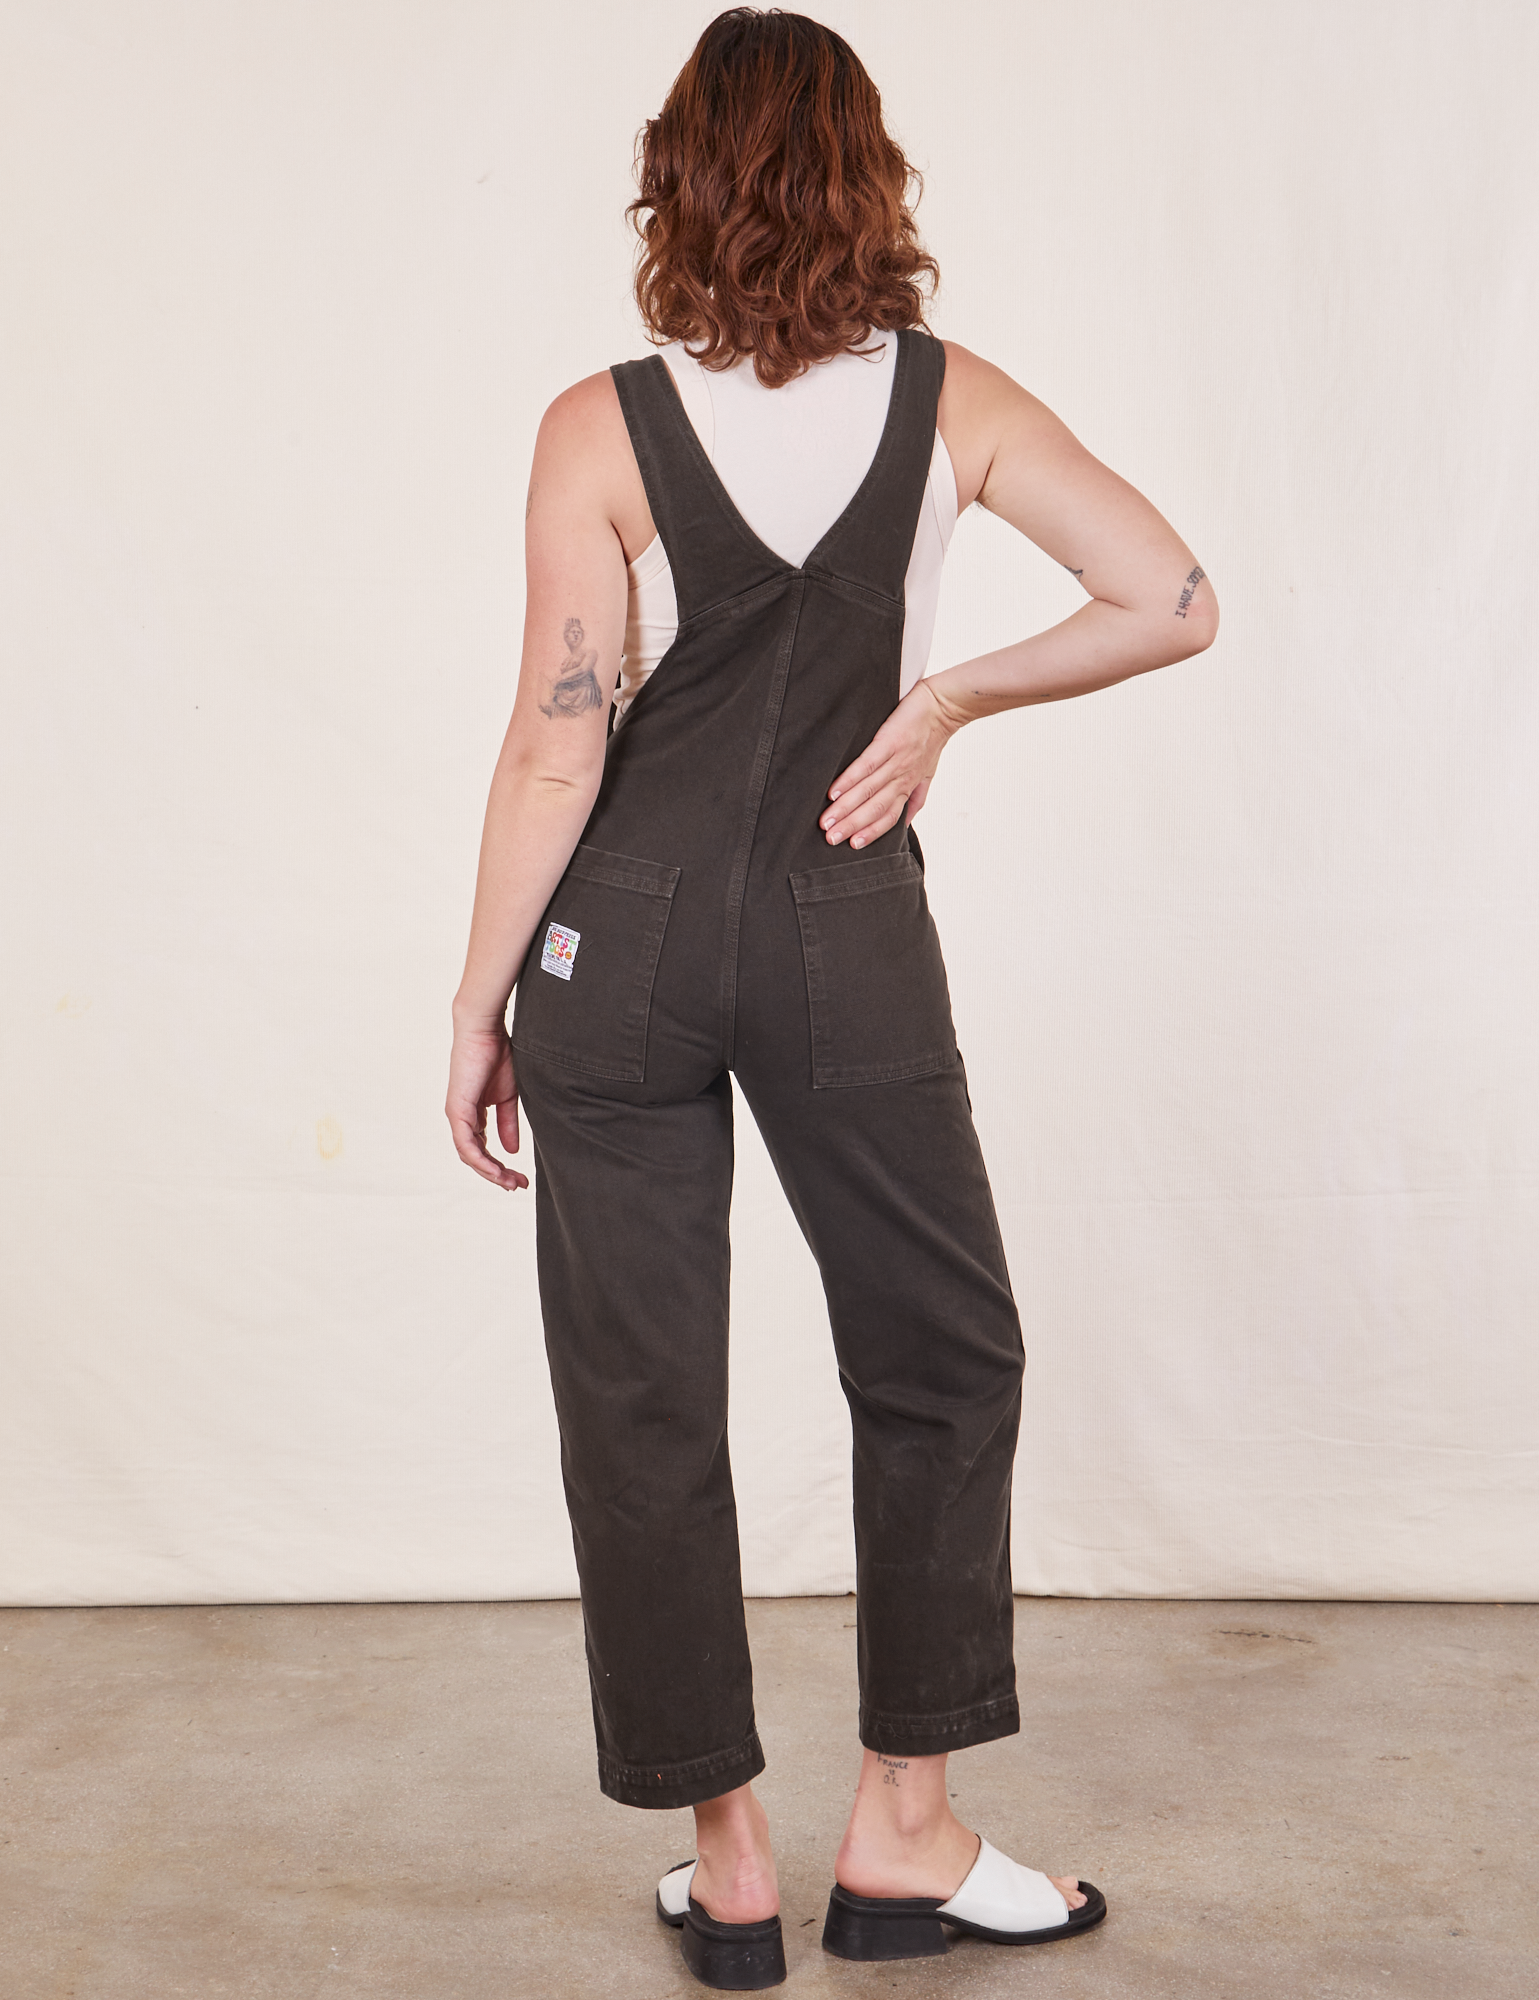 Back view of Original Overalls in Mono Espresso and Cropped Tank Top in vintage tee off-white worn by Alex.